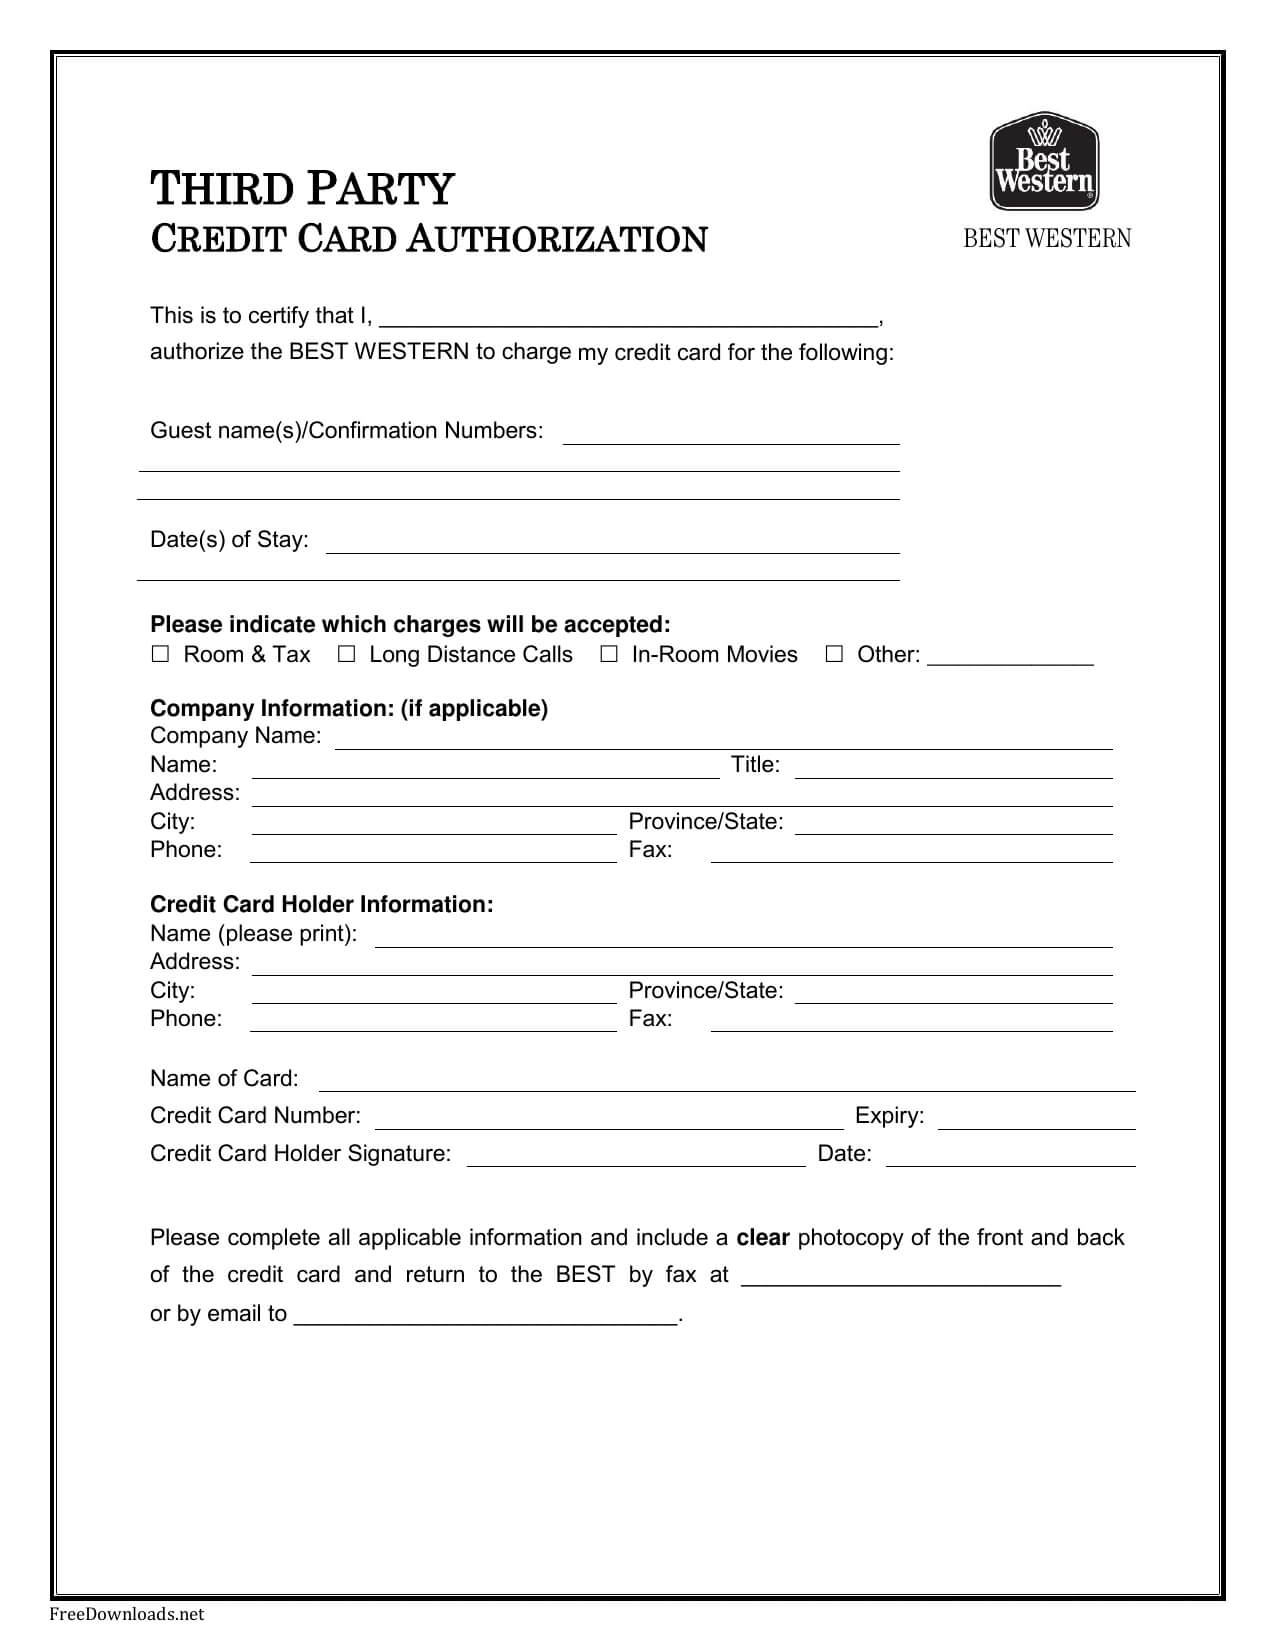 004 Credit Card Authorization Template Ideas Best Western With Credit Card Payment Form Template Pdf